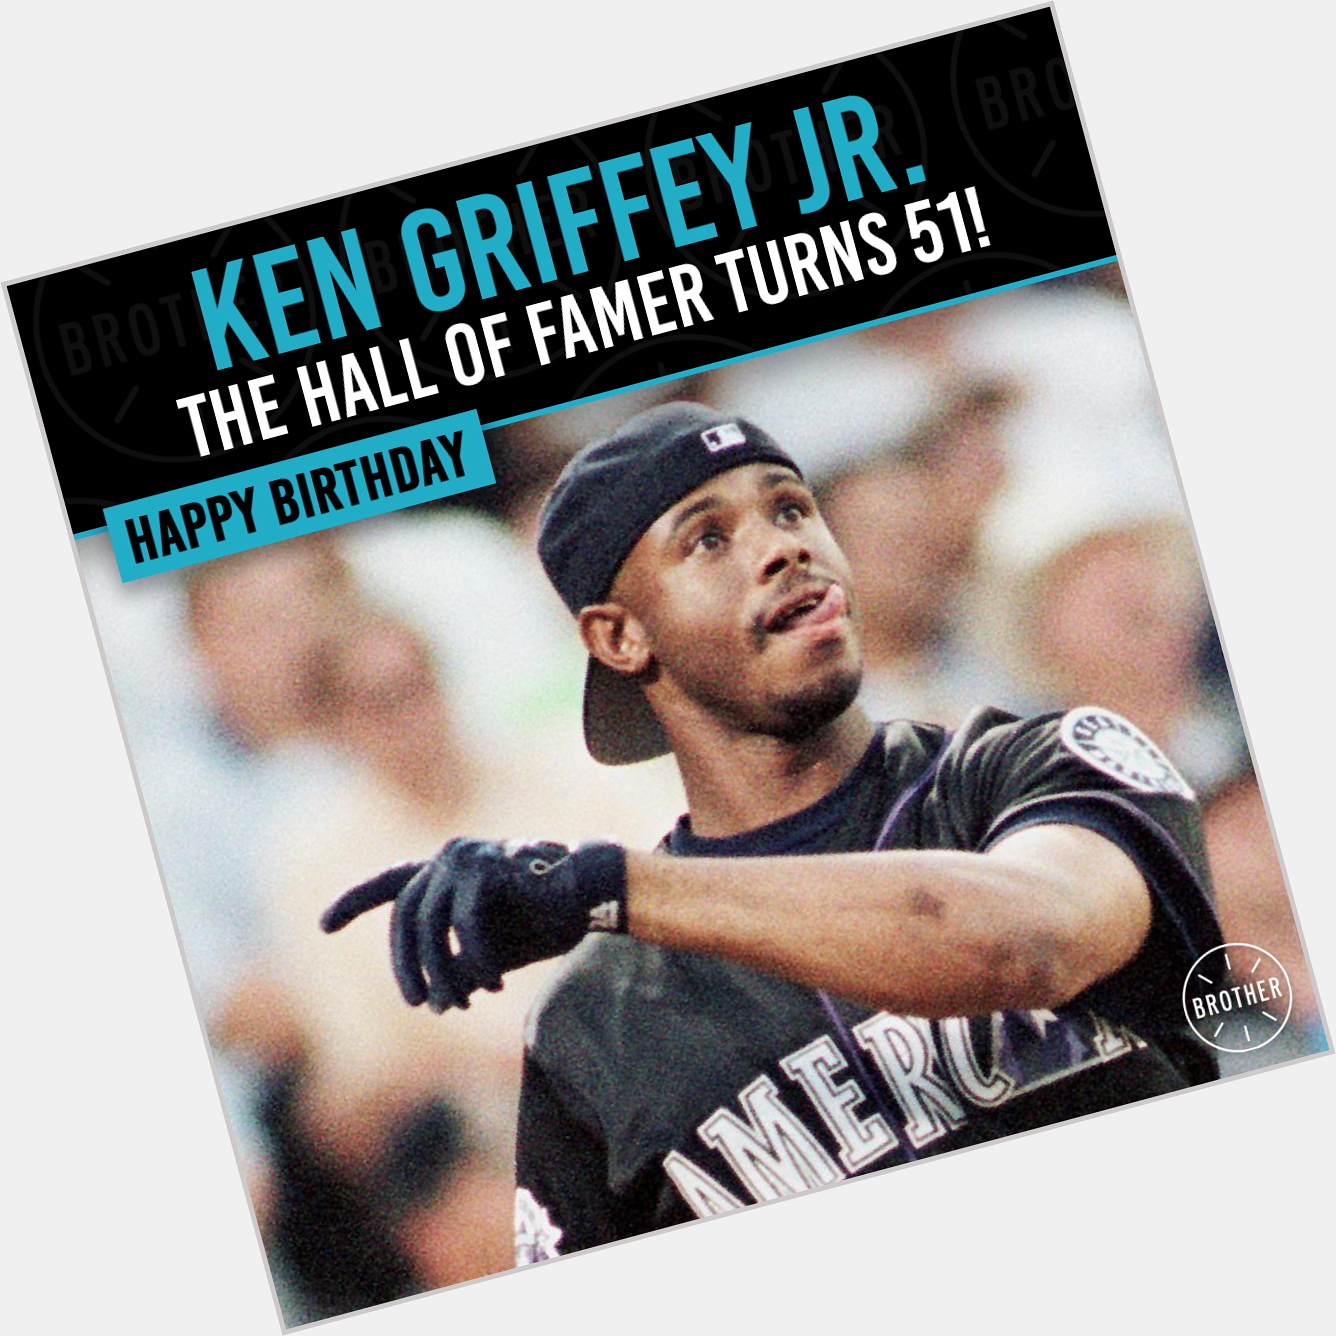 Ken Griffey Jr. turns 51 today, but he will be The Kid forever. Happy Birthday!  